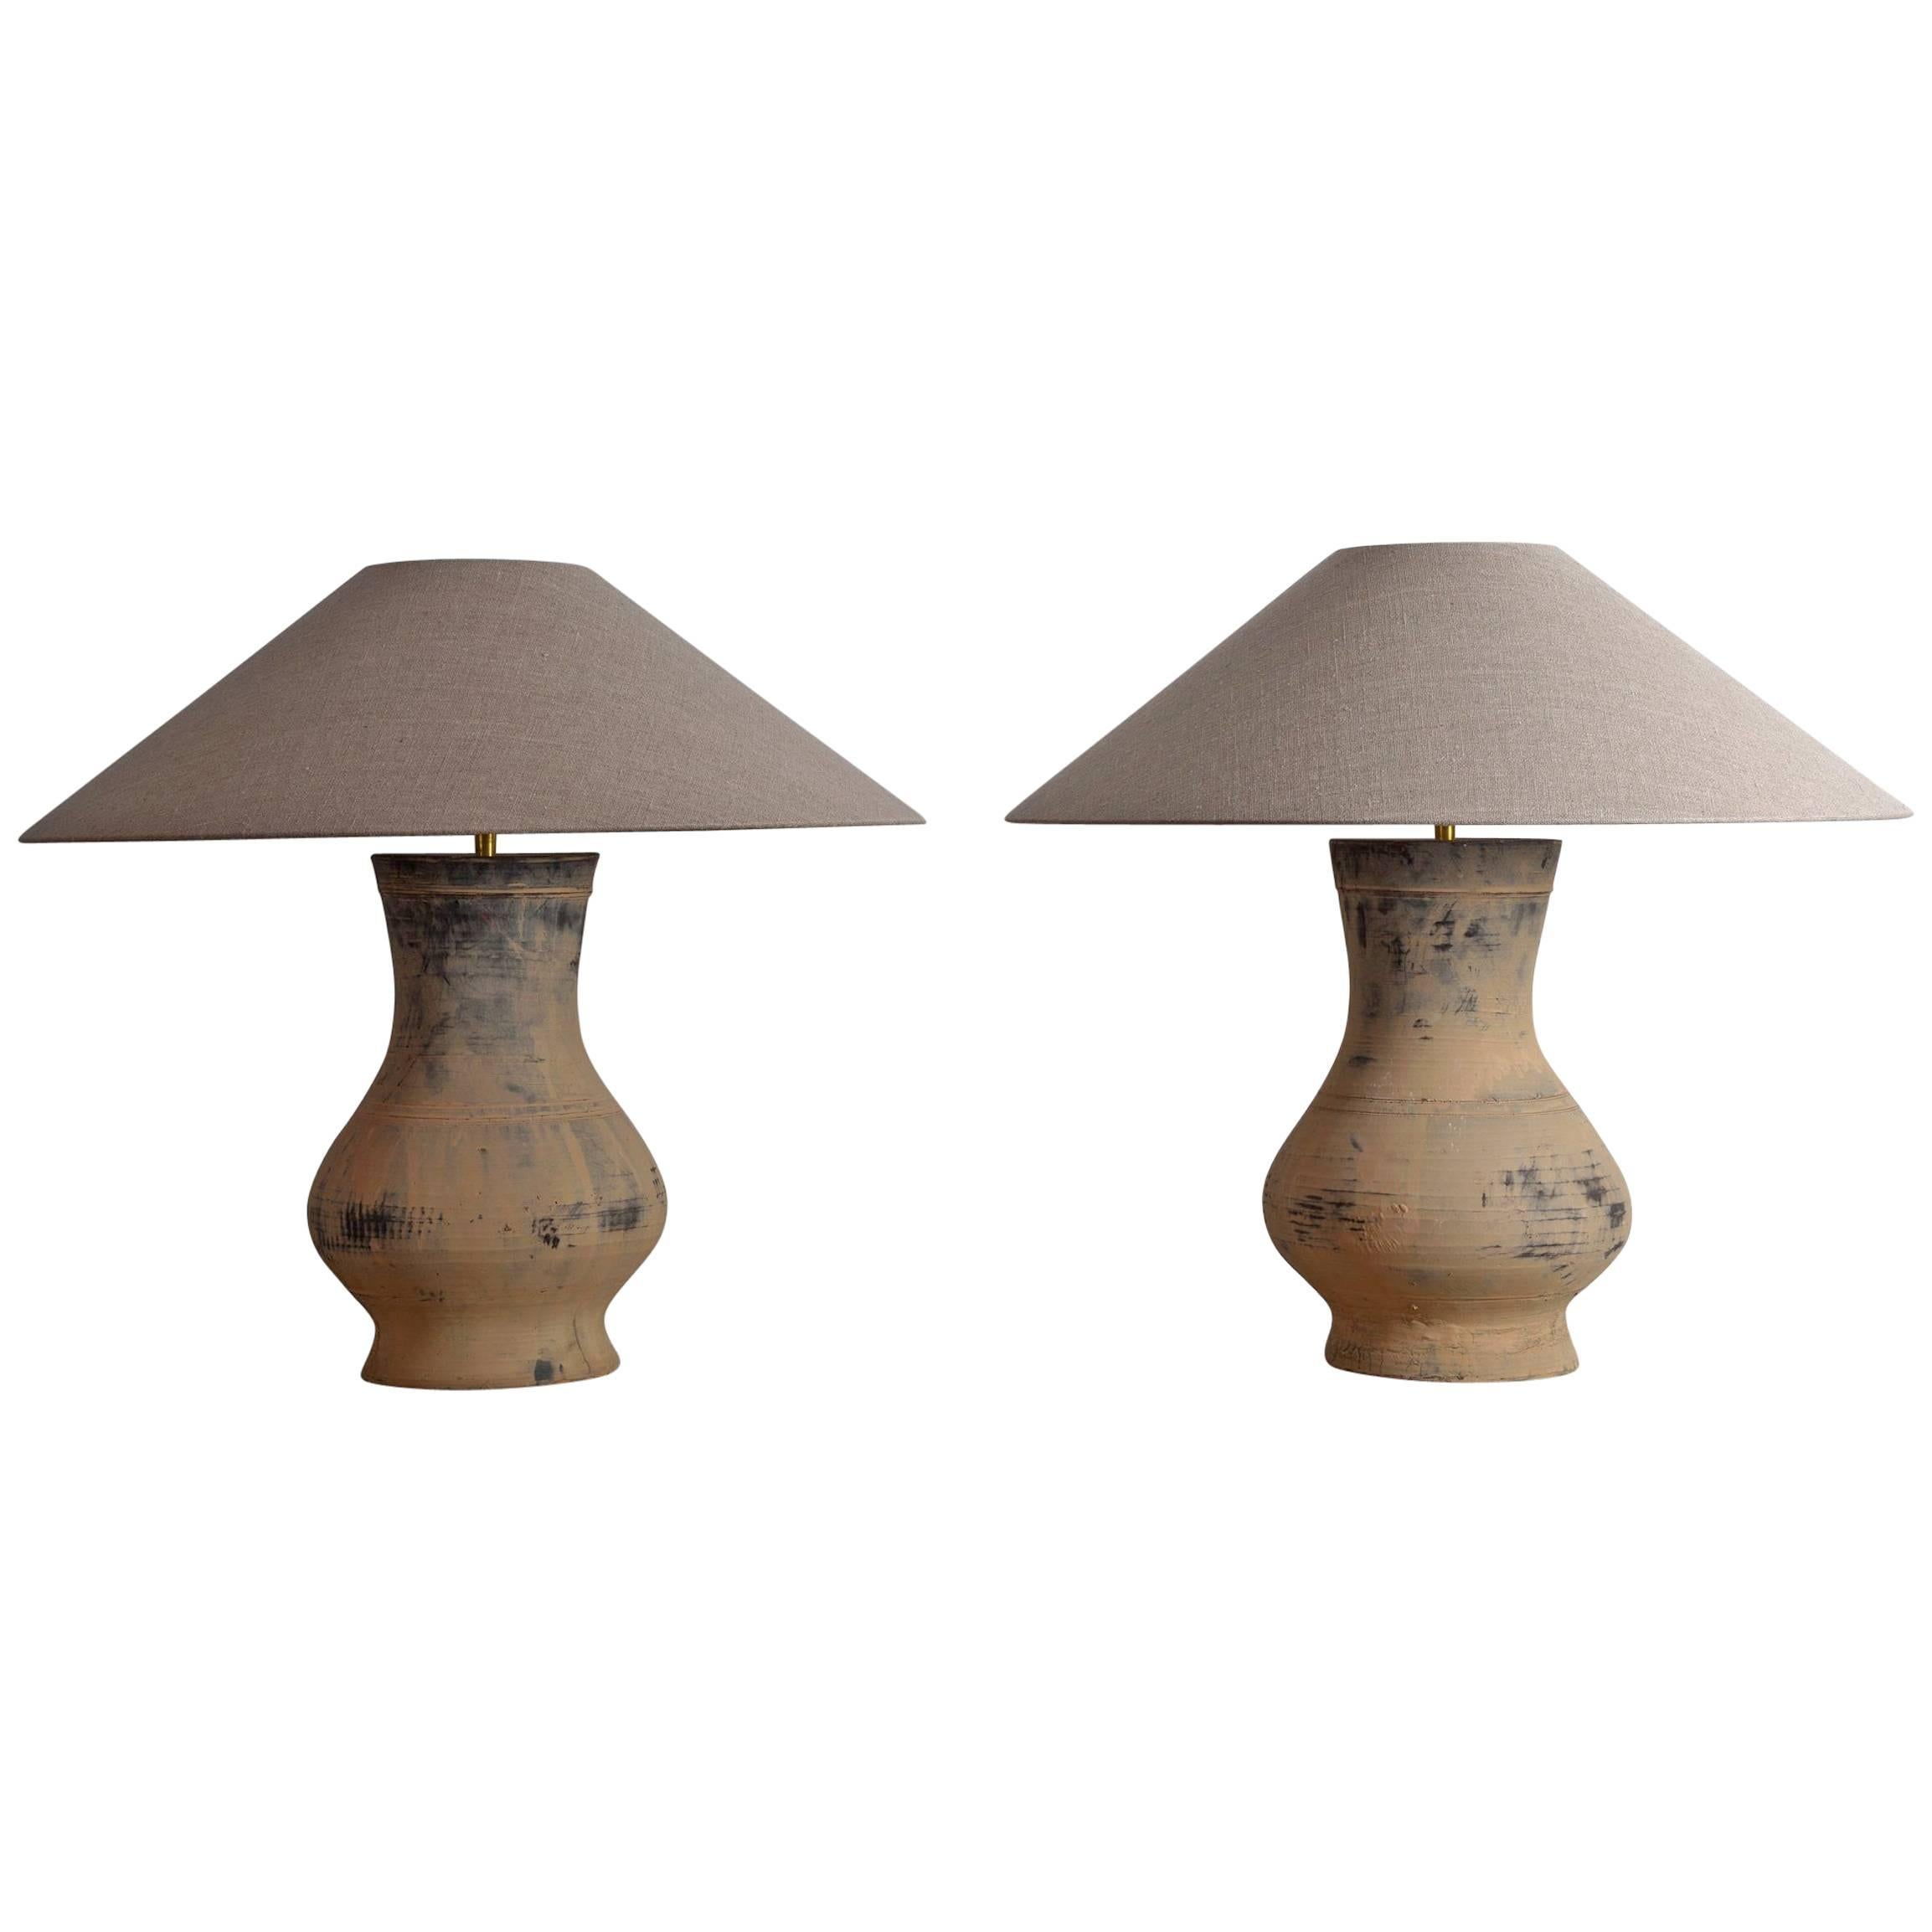 Near Pair of Chinese Han Lamps with Handmade Belgian Linen Shades